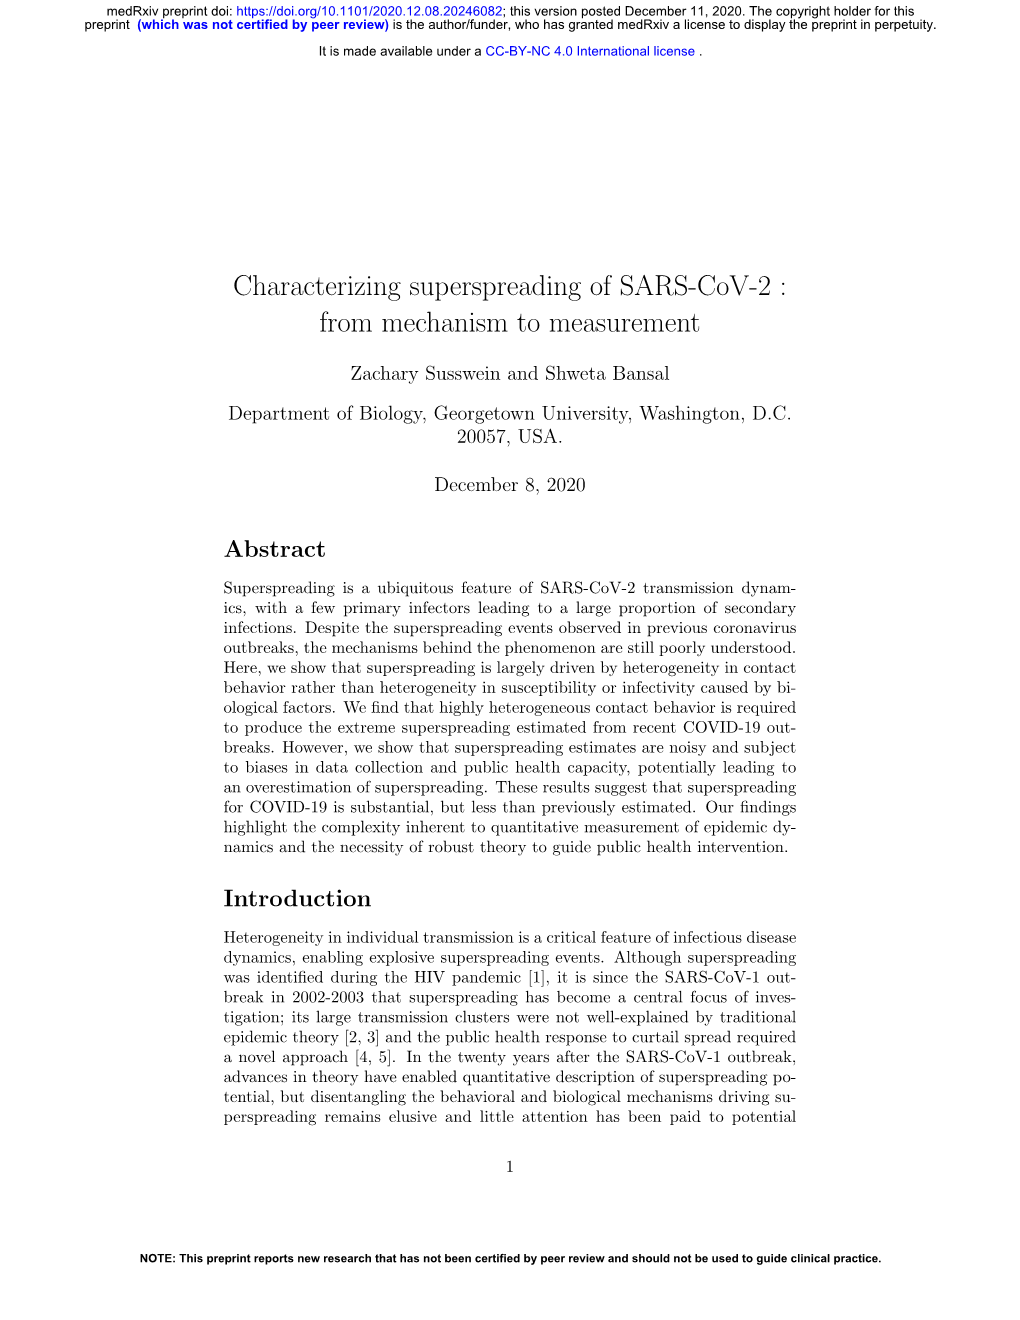 Characterizing Superspreading of SARS-Cov-2 : from Mechanism to Measurement